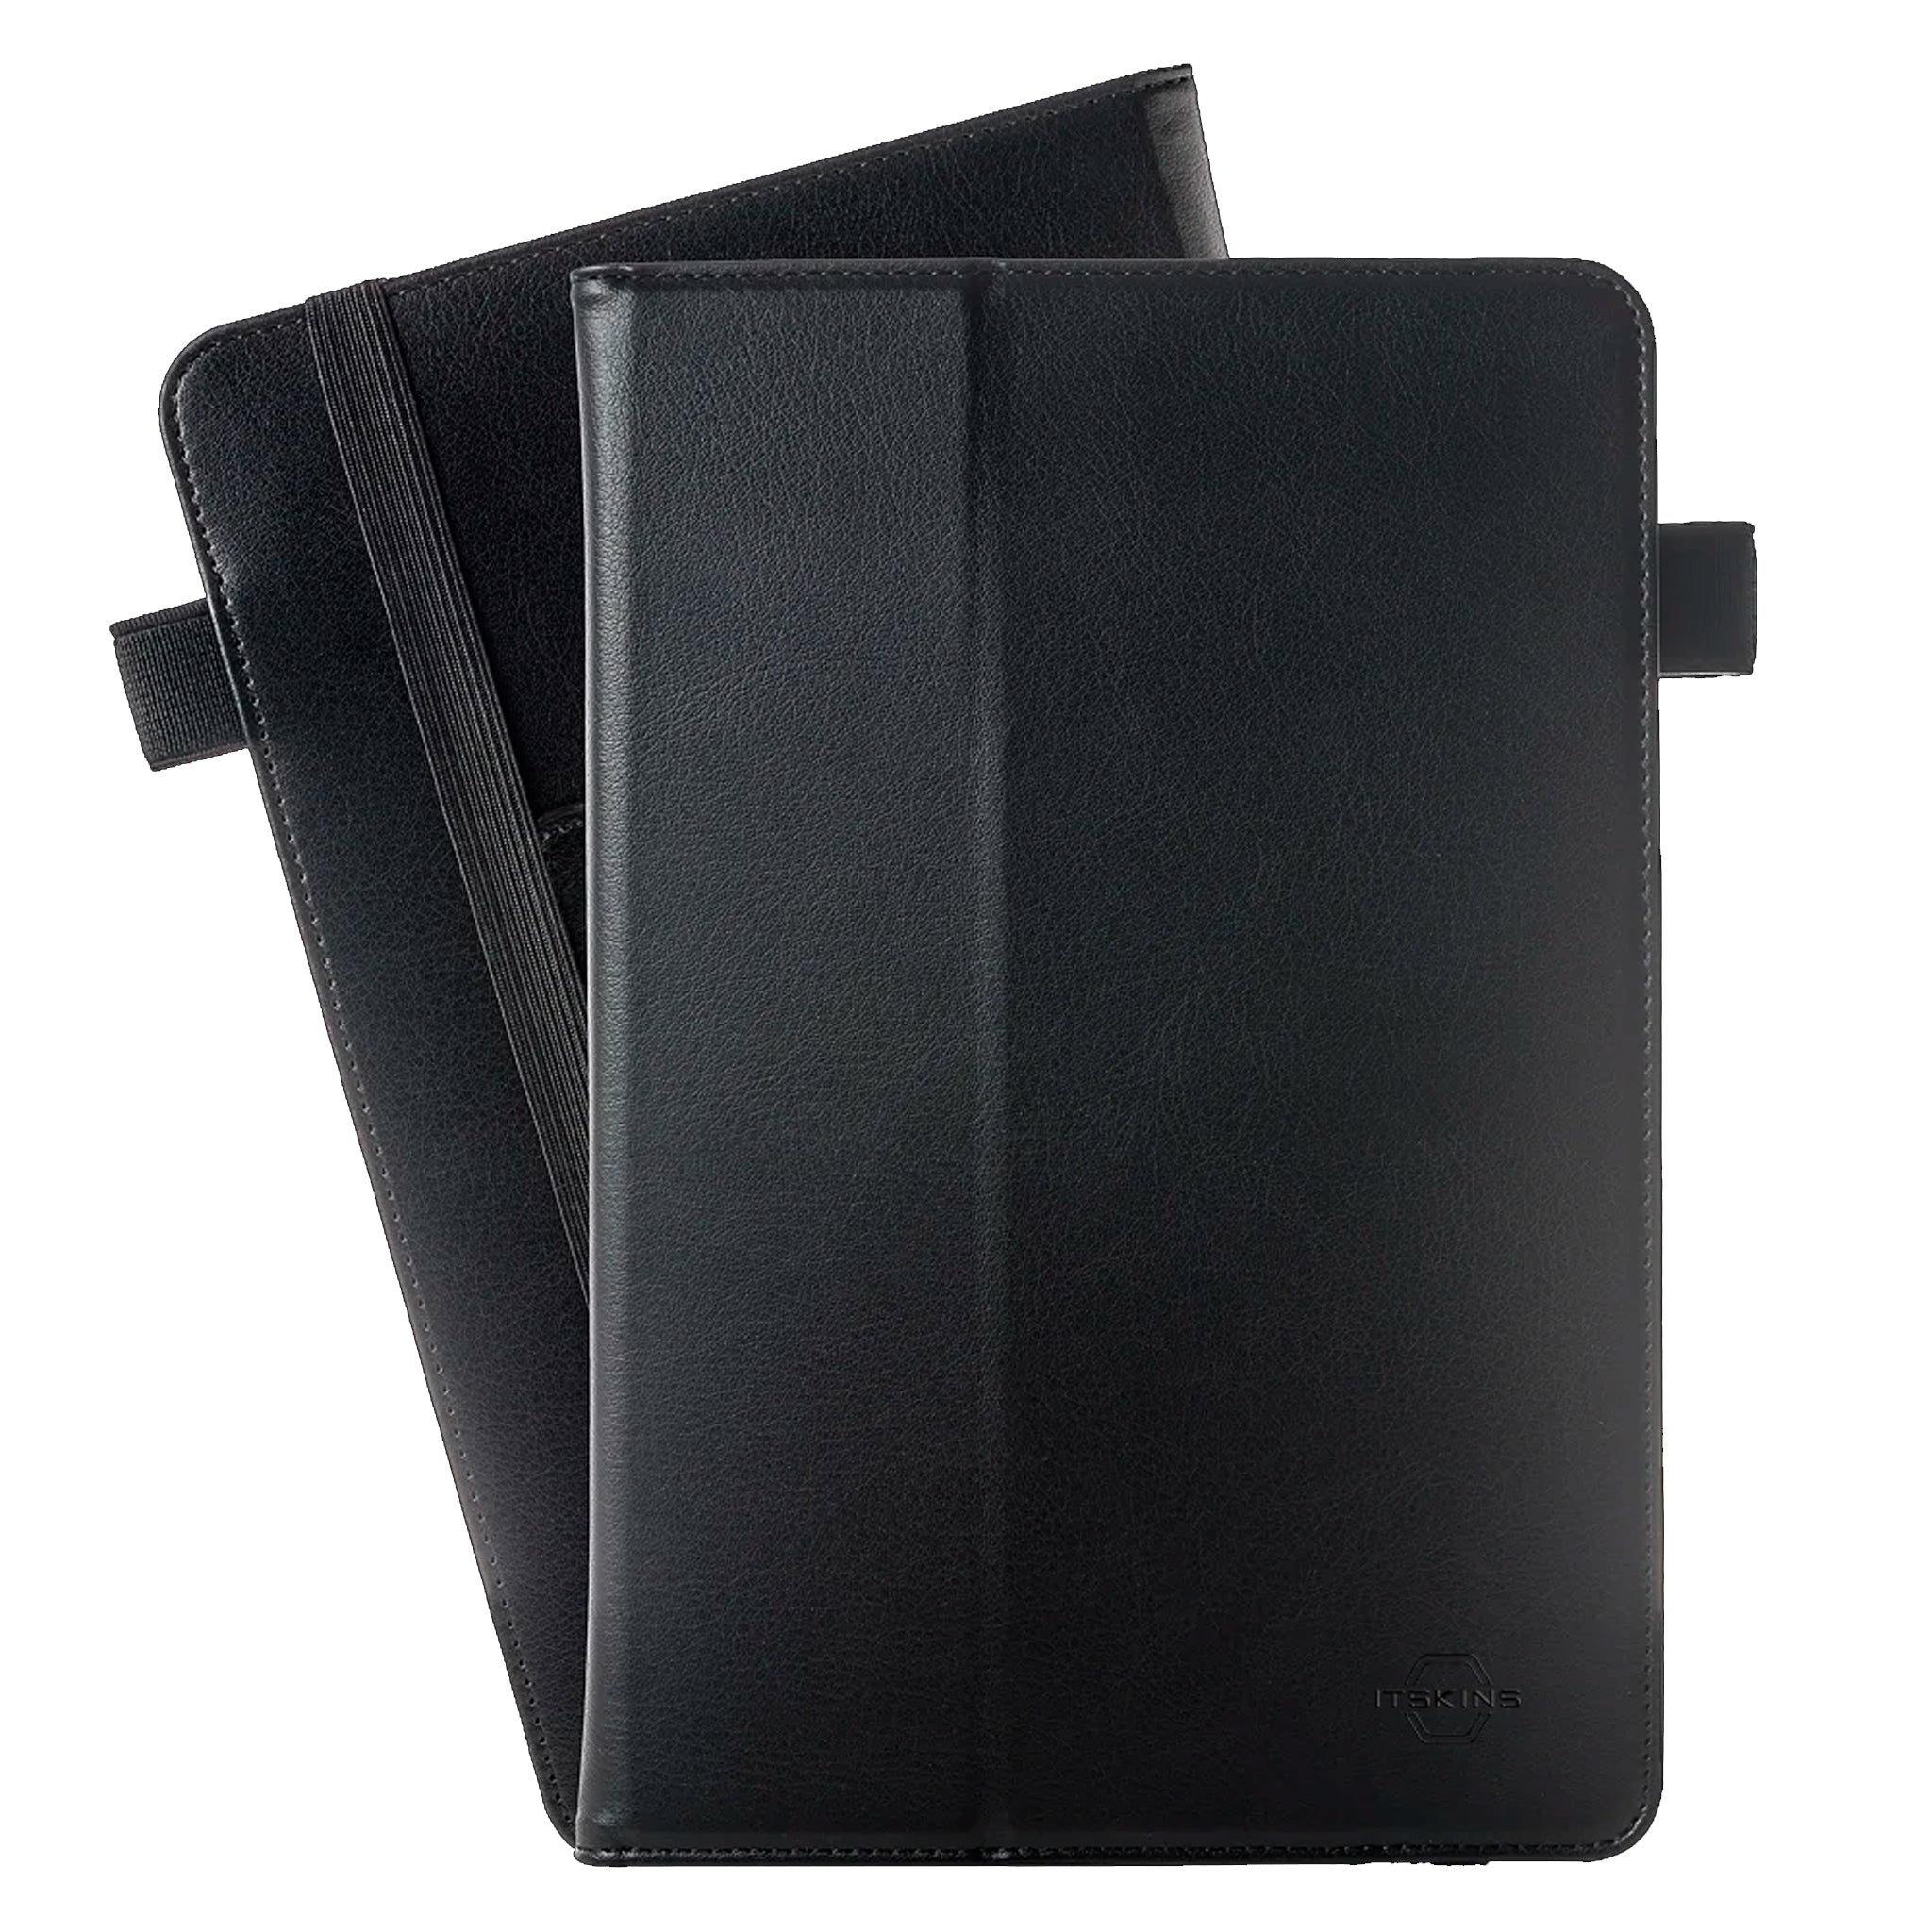 Itskins - Universal Folio Case For 9 To 10.5 Inch Tablets - Black